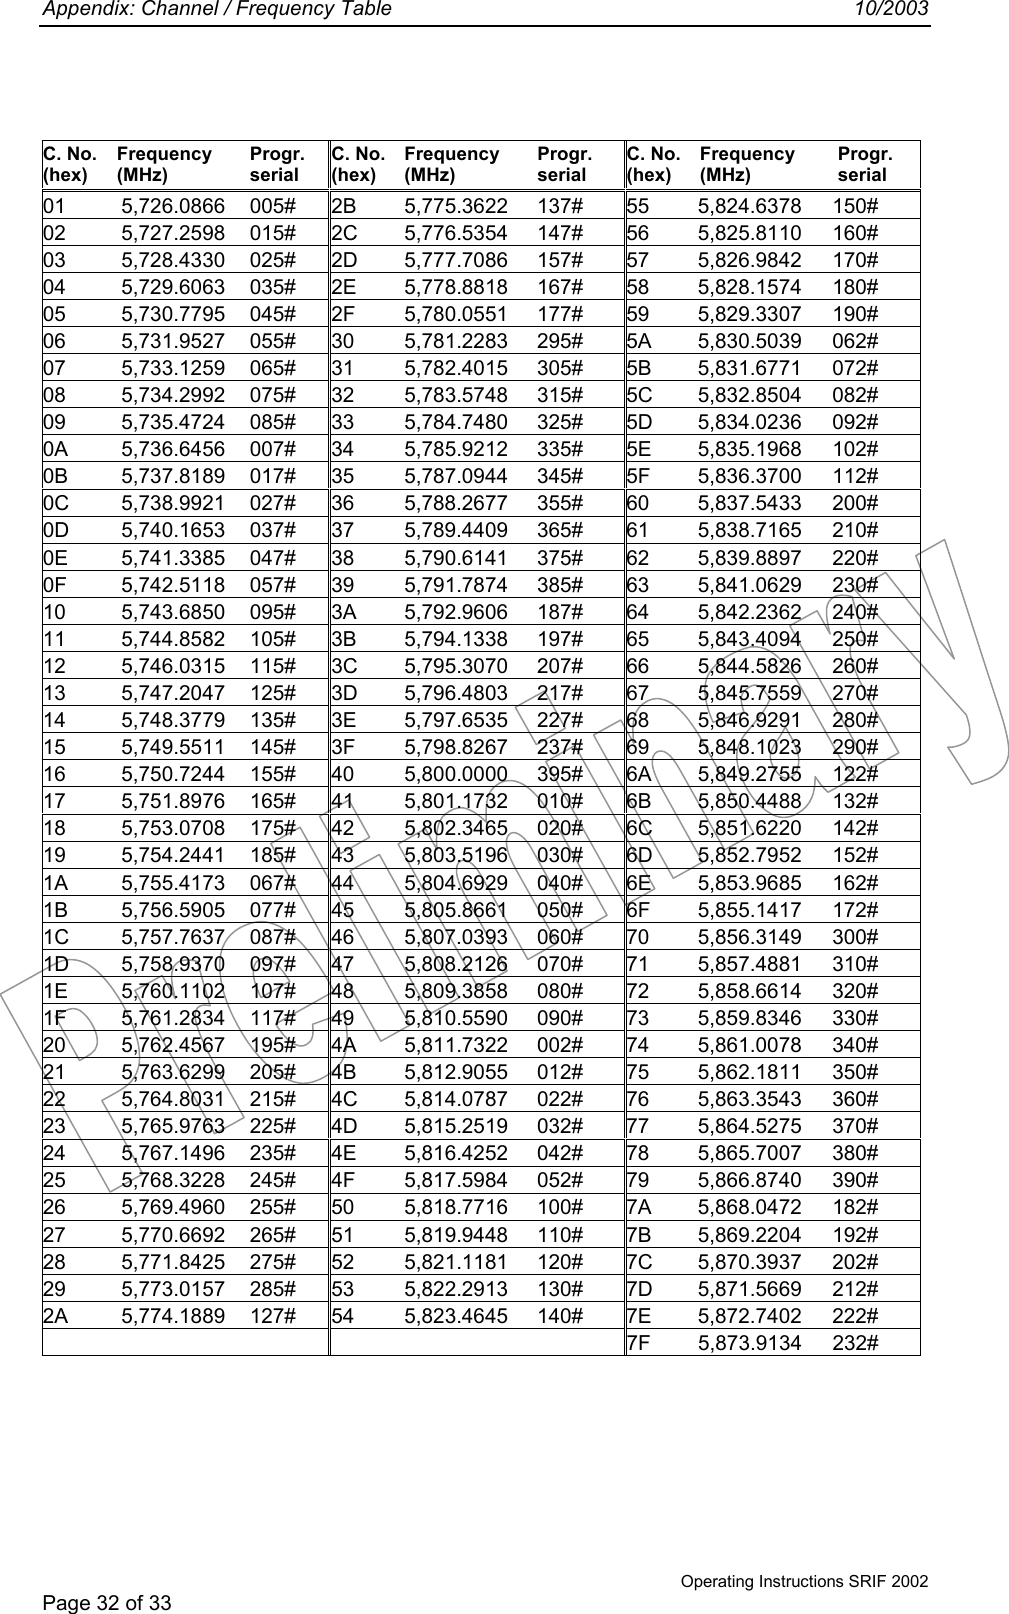 Appendix: Channel / Frequency Table 10/2003Operating Instructions SRIF 2002Page 32 of 33C. No.(hex)Frequency(MHz)Progr.serialC. No.(hex)Frequency(MHz)Progr.serialC. No.(hex)Frequency(MHz)Progr.serial01 5,726.0866 005# 2B 5,775.3622 137# 55 5,824.6378 150#02 5,727.2598 015# 2C 5,776.5354 147# 56 5,825.8110 160#03 5,728.4330 025# 2D 5,777.7086 157# 57 5,826.9842 170#04 5,729.6063 035# 2E 5,778.8818 167# 58 5,828.1574 180#05 5,730.7795 045# 2F 5,780.0551 177# 59 5,829.3307 190#06 5,731.9527 055# 30 5,781.2283 295# 5A 5,830.5039 062#07 5,733.1259 065# 31 5,782.4015 305# 5B 5,831.6771 072#08 5,734.2992 075# 32 5,783.5748 315# 5C 5,832.8504 082#09 5,735.4724 085# 33 5,784.7480 325# 5D 5,834.0236 092#0A 5,736.6456 007# 34 5,785.9212 335# 5E 5,835.1968 102#0B 5,737.8189 017# 35 5,787.0944 345# 5F 5,836.3700 112#0C 5,738.9921 027# 36 5,788.2677 355# 60 5,837.5433 200#0D 5,740.1653 037# 37 5,789.4409 365# 61 5,838.7165 210#0E 5,741.3385 047# 38 5,790.6141 375# 62 5,839.8897 220#0F 5,742.5118 057# 39 5,791.7874 385# 63 5,841.0629 230#10 5,743.6850 095# 3A 5,792.9606 187# 64 5,842.2362 240#11 5,744.8582 105# 3B 5,794.1338 197# 65 5,843.4094 250#12 5,746.0315 115# 3C 5,795.3070 207# 66 5,844.5826 260#13 5,747.2047 125# 3D 5,796.4803 217# 67 5,845.7559 270#14 5,748.3779 135# 3E 5,797.6535 227# 68 5,846.9291 280#15 5,749.5511 145# 3F 5,798.8267 237# 69 5,848.1023 290#16 5,750.7244 155# 40 5,800.0000 395# 6A 5,849.2755 122#17 5,751.8976 165# 41 5,801.1732 010# 6B 5,850.4488 132#18 5,753.0708 175# 42 5,802.3465 020# 6C 5,851.6220 142#19 5,754.2441 185# 43 5,803.5196 030# 6D 5,852.7952 152#1A 5,755.4173 067# 44 5,804.6929 040# 6E 5,853.9685 162#1B 5,756.5905 077# 45 5,805.8661 050# 6F 5,855.1417 172#1C 5,757.7637 087# 46 5,807.0393 060# 70 5,856.3149 300#1D 5,758.9370 097# 47 5,808.2126 070# 71 5,857.4881 310#1E 5,760.1102 107# 48 5,809.3858 080# 72 5,858.6614 320#1F 5,761.2834 117# 49 5,810.5590 090# 73 5,859.8346 330#20 5,762.4567 195# 4A 5,811.7322 002# 74 5,861.0078 340#21 5,763.6299 205# 4B 5,812.9055 012# 75 5,862.1811 350#22 5,764.8031 215# 4C 5,814.0787 022# 76 5,863.3543 360#23 5,765.9763 225# 4D 5,815.2519 032# 77 5,864.5275 370#24 5,767.1496 235# 4E 5,816.4252 042# 78 5,865.7007 380#25 5,768.3228 245# 4F 5,817.5984 052# 79 5,866.8740 390#26 5,769.4960 255# 50 5,818.7716 100# 7A 5,868.0472 182#27 5,770.6692 265# 51 5,819.9448 110# 7B 5,869.2204 192#28 5,771.8425 275# 52 5,821.1181 120# 7C 5,870.3937 202#29 5,773.0157 285# 53 5,822.2913 130# 7D 5,871.5669 212#2A 5,774.1889 127# 54 5,823.4645 140# 7E 5,872.7402 222#7F 5,873.9134 232#